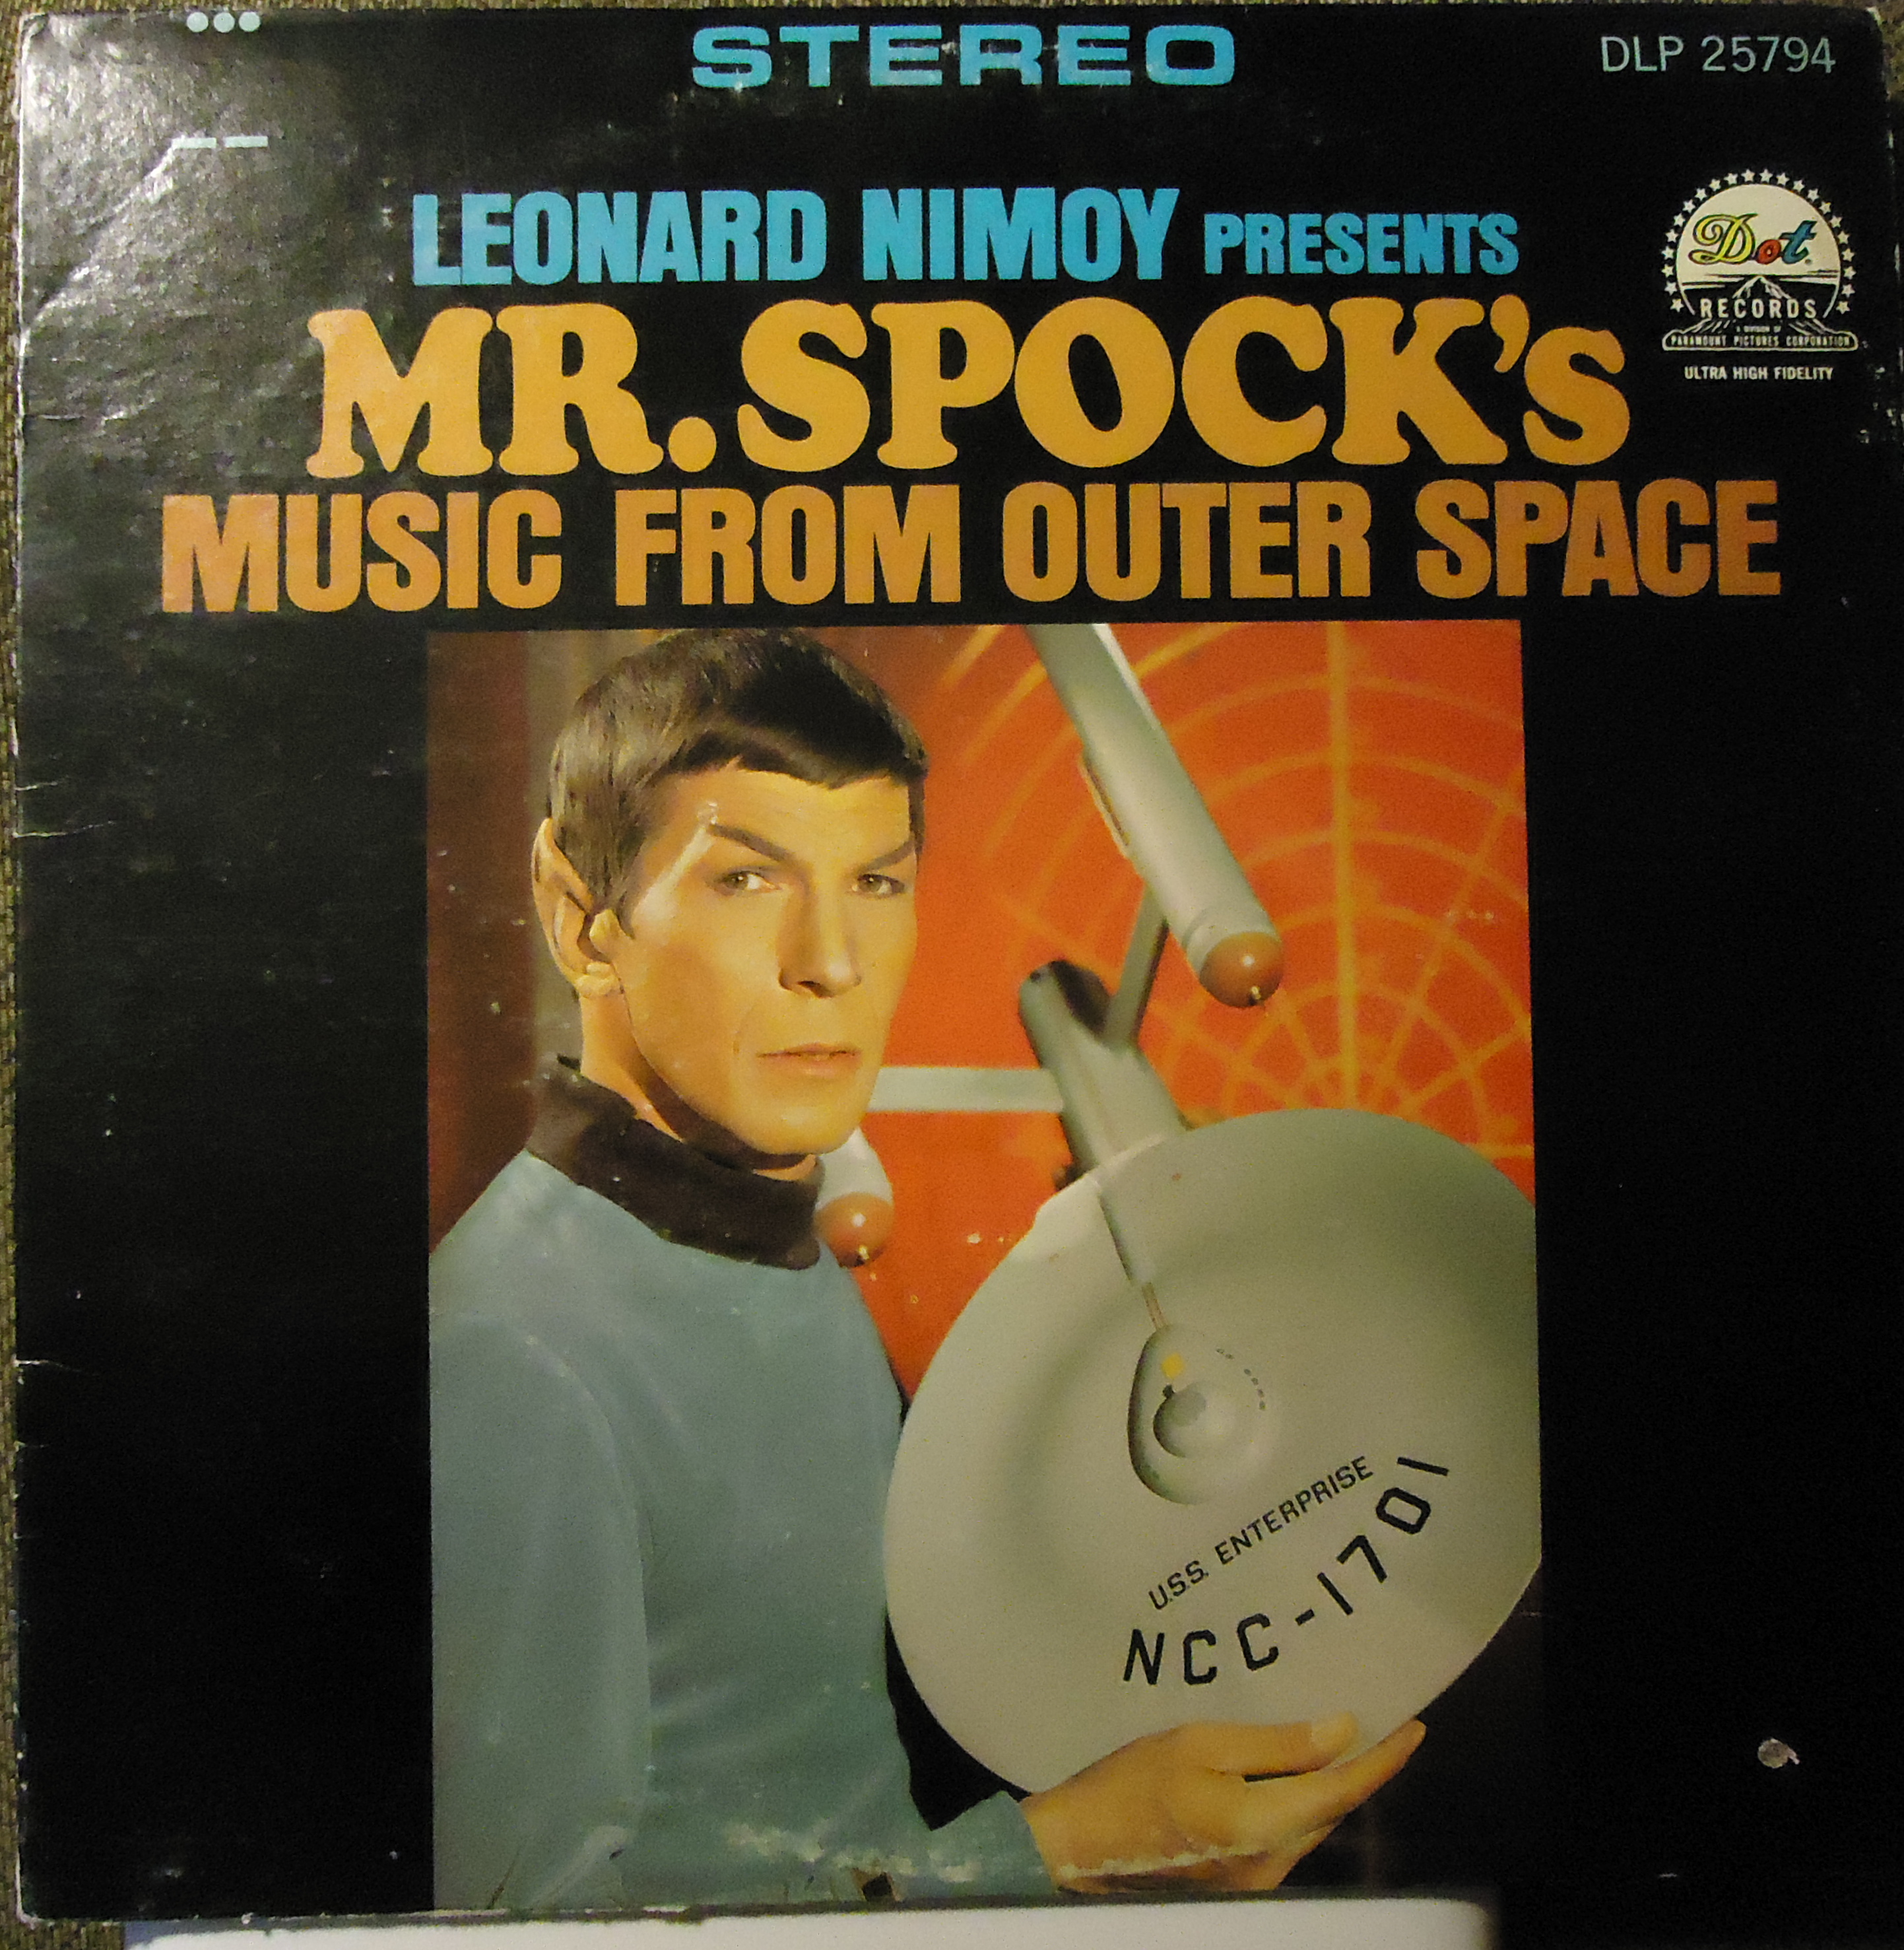 Stereo Dlp 25794 Leonard Nimoy Presents Mr.Spock'S Music From Outer Space Uss Enterprise Wc11